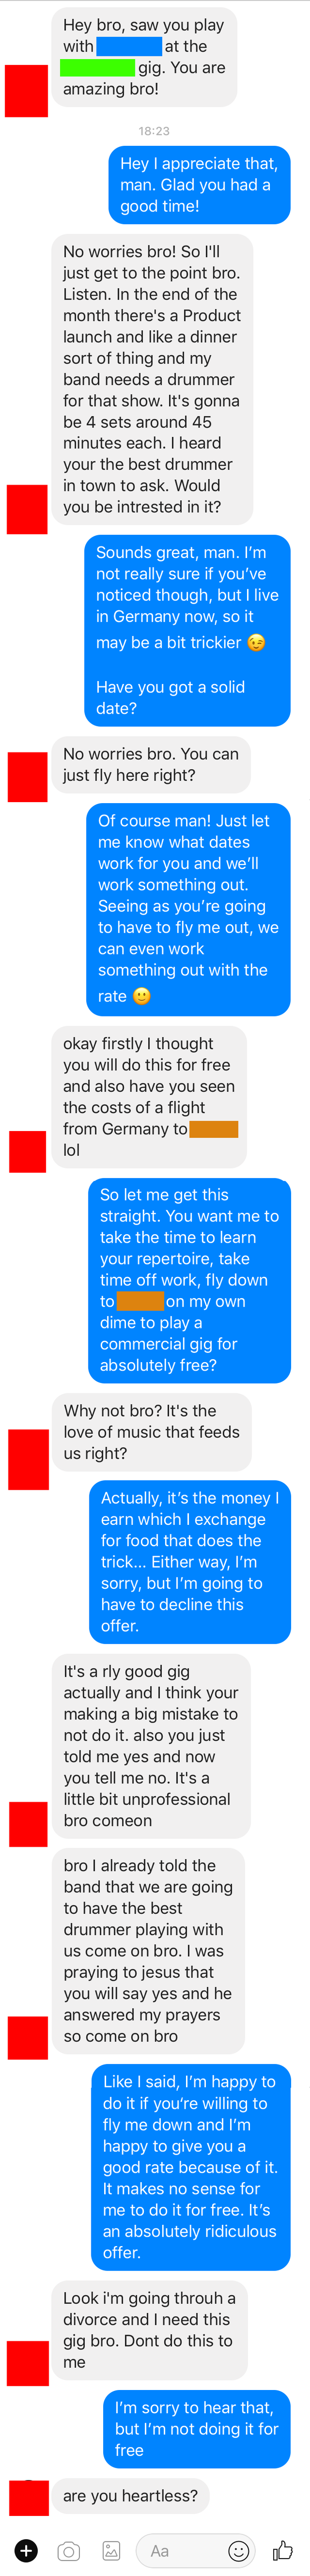 The person who wanted a musician to pay for his own flight in order to play a gig for free.